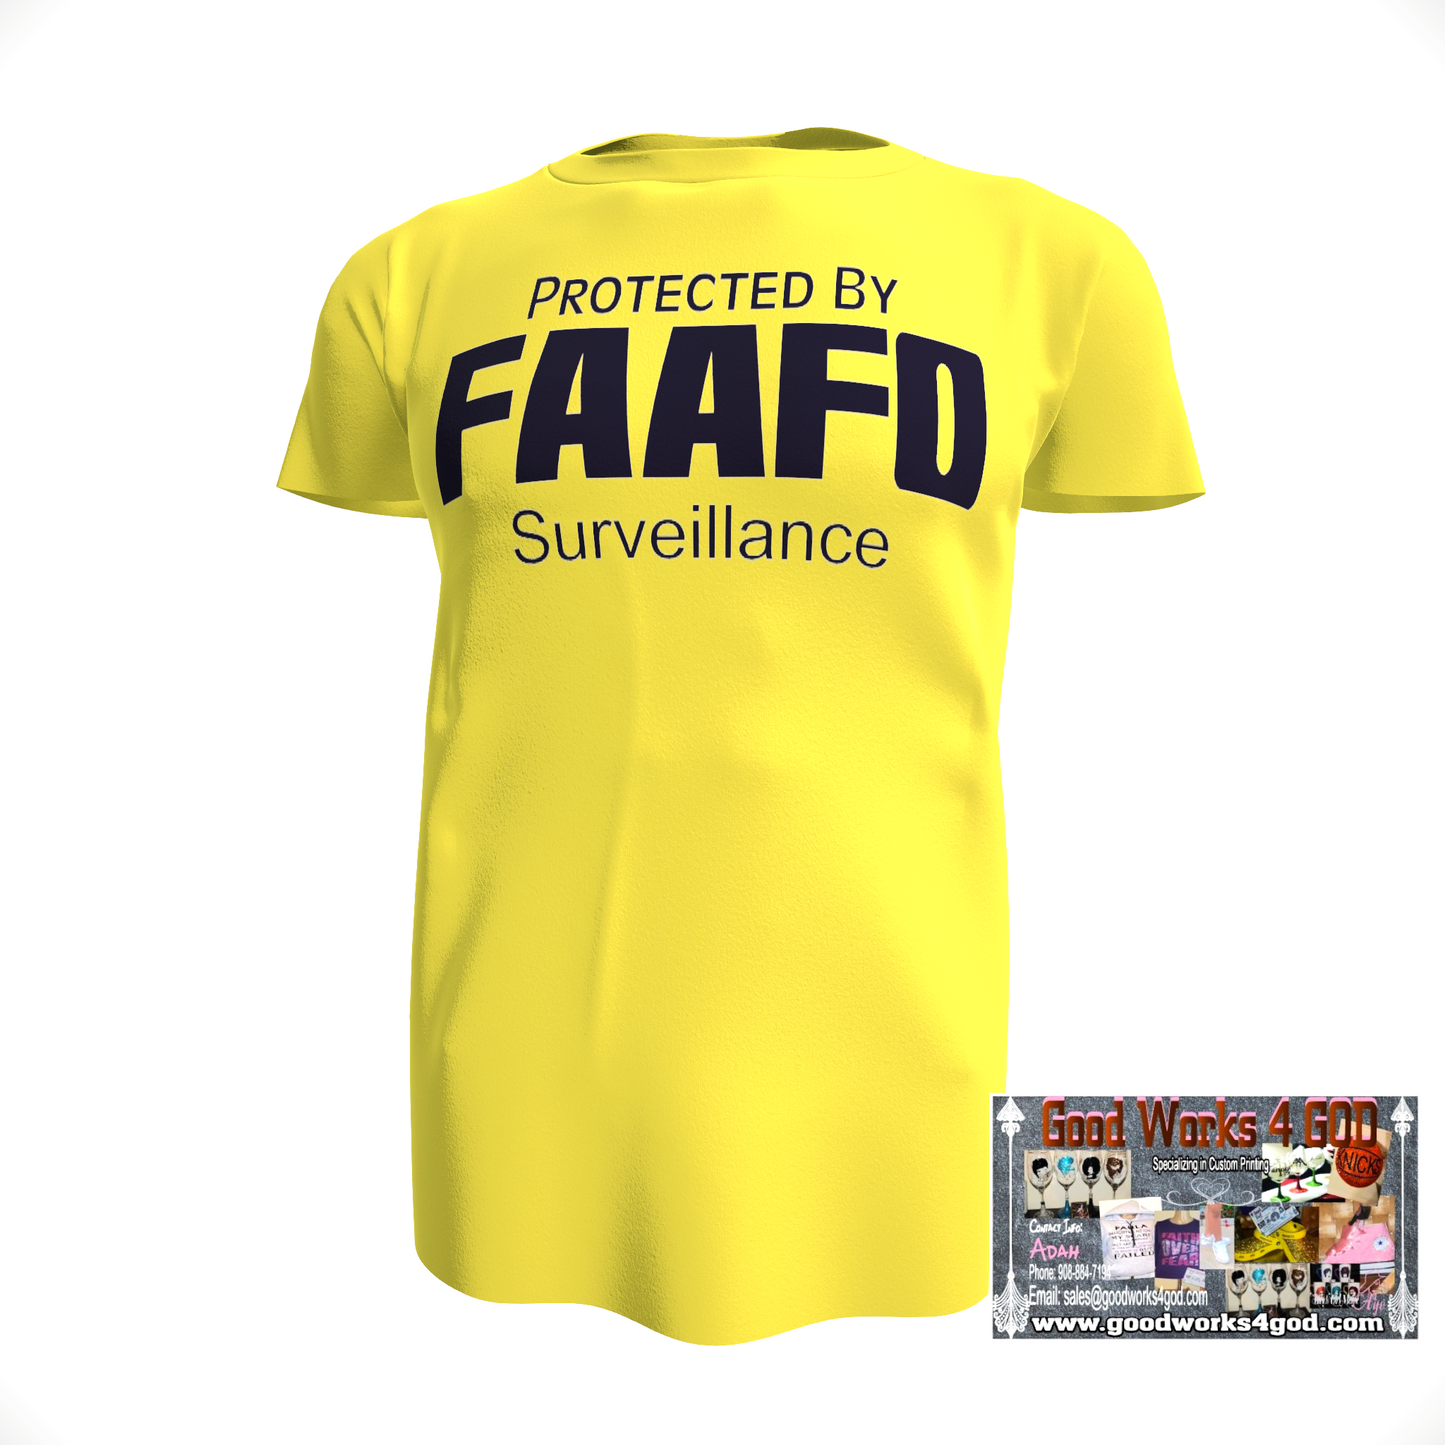 Protected By FAAFO Surveillance